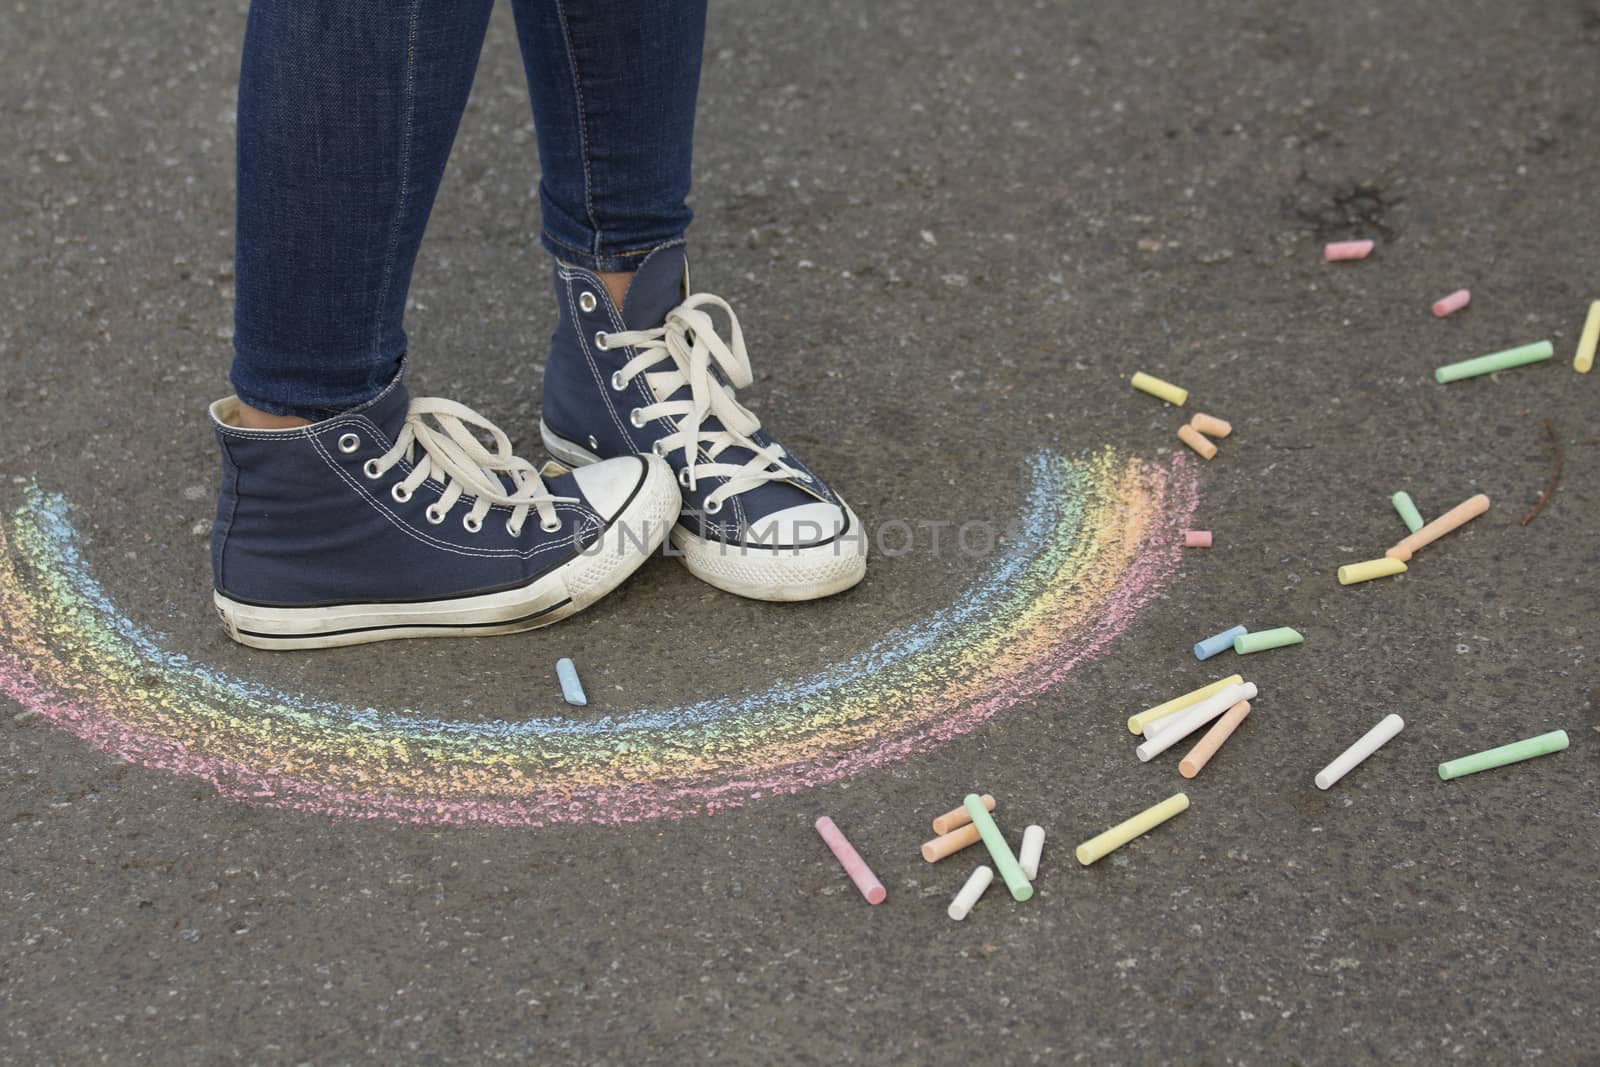 Feet in sneakers are on the pavement next to the picture of the Rainbow